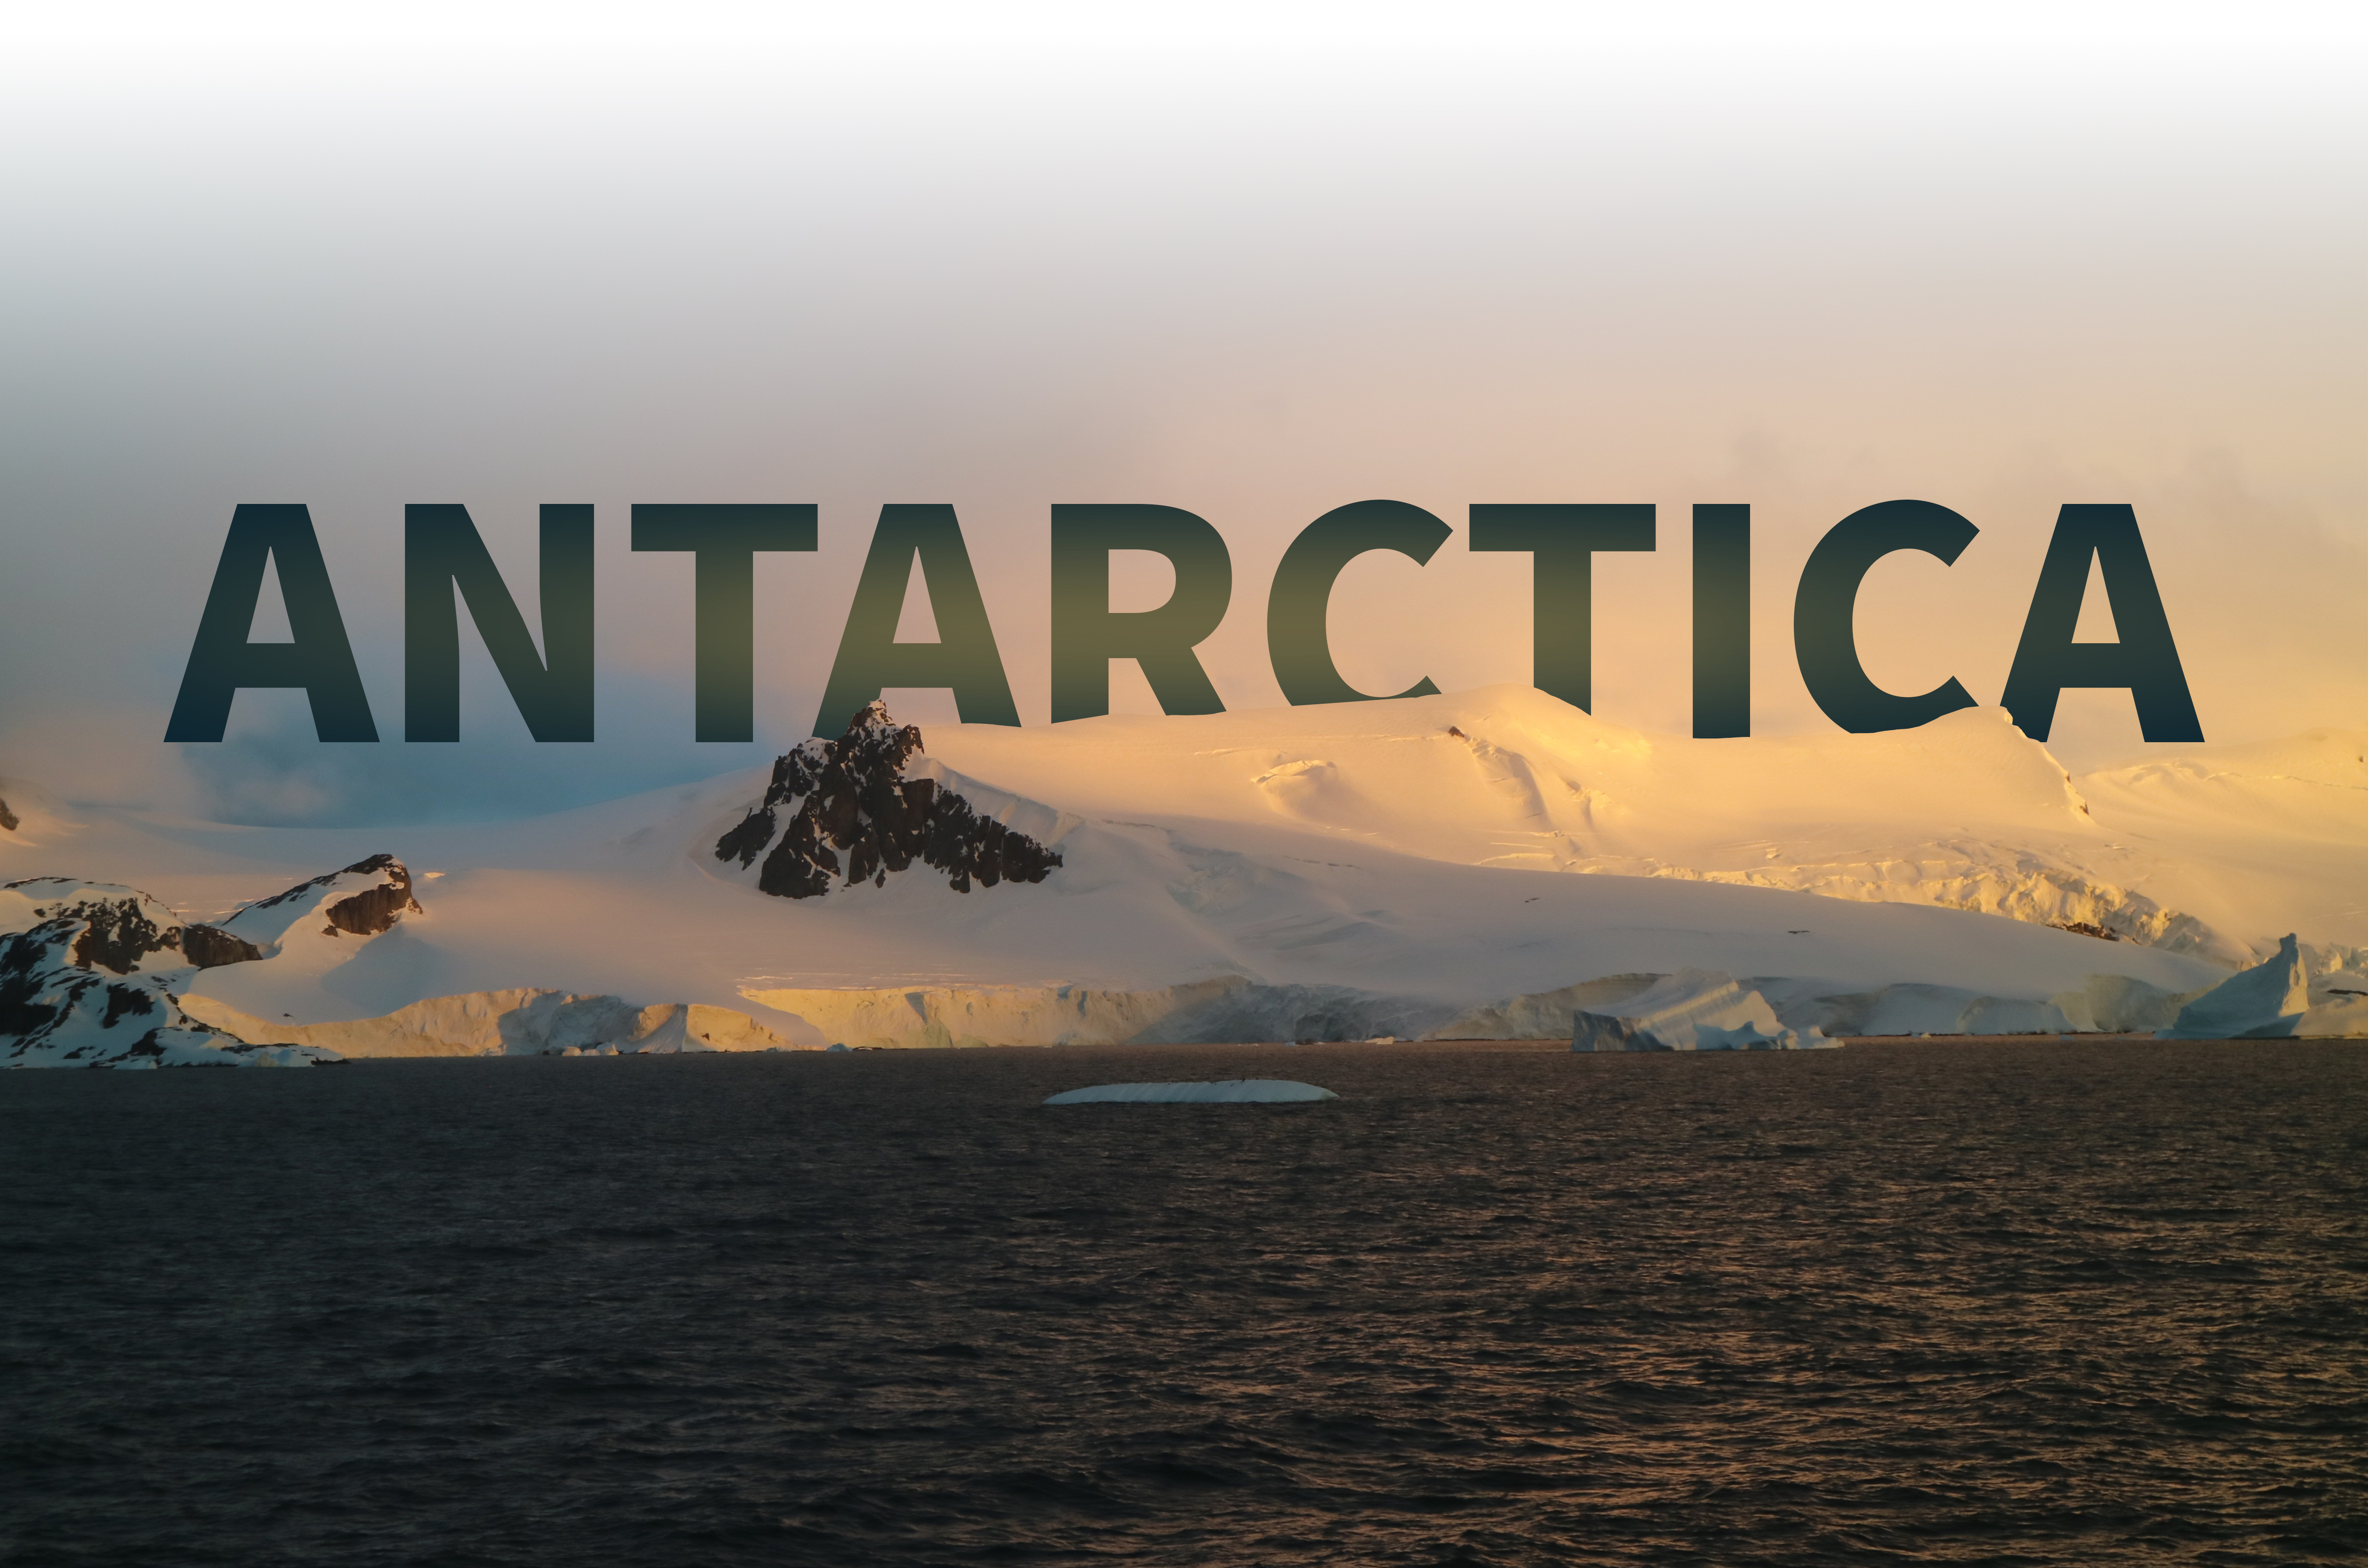 An image of Antarctica at sunset with orange skies on a snowy mountain next to the sea.